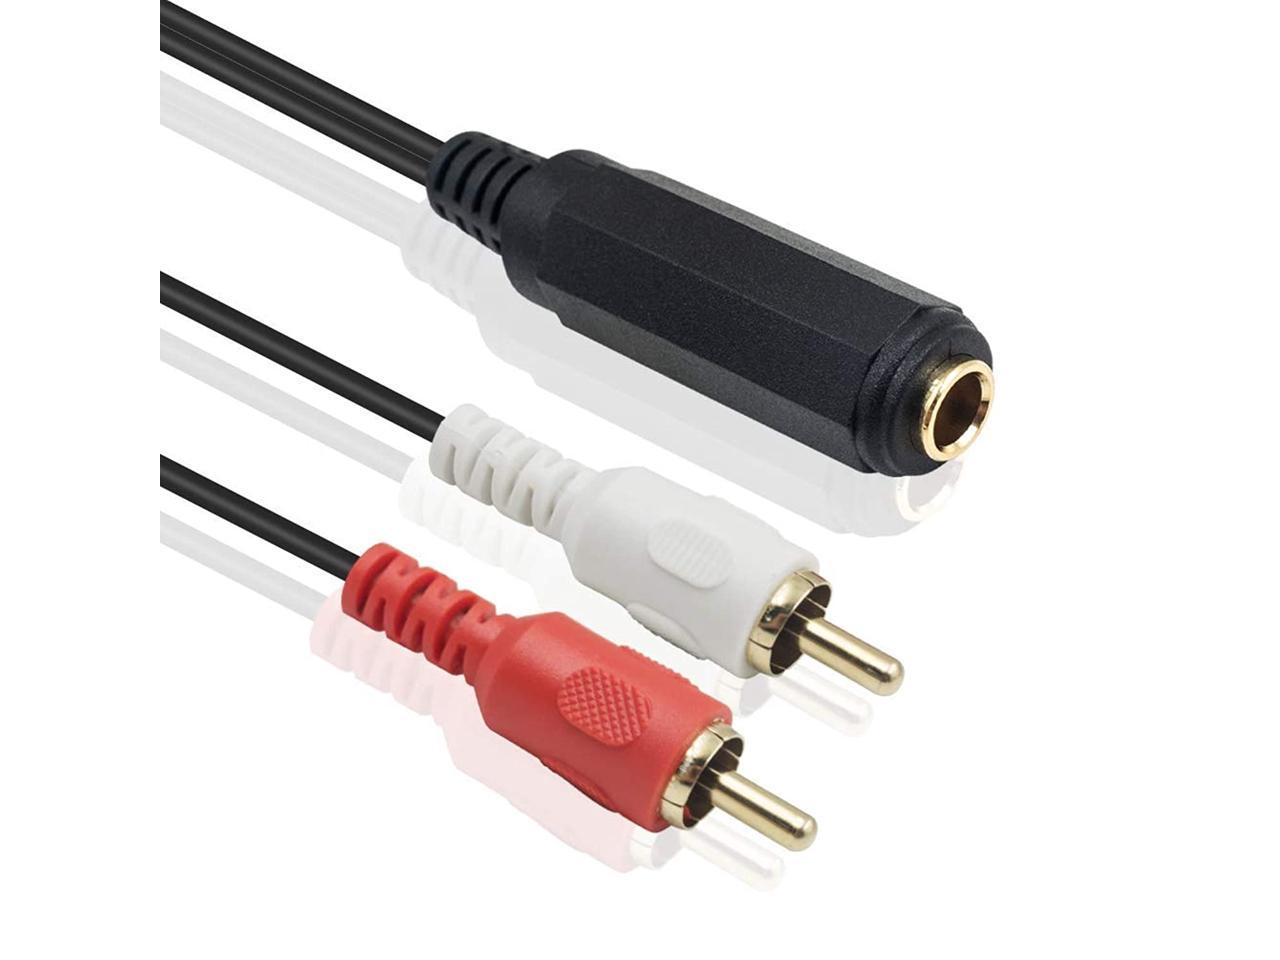 Poyiccot 1/4 inch to RCA Cable 5 feet, 6.35mm 1/4 inch TRS Stereo Jack Female to 2 RCA Male Y